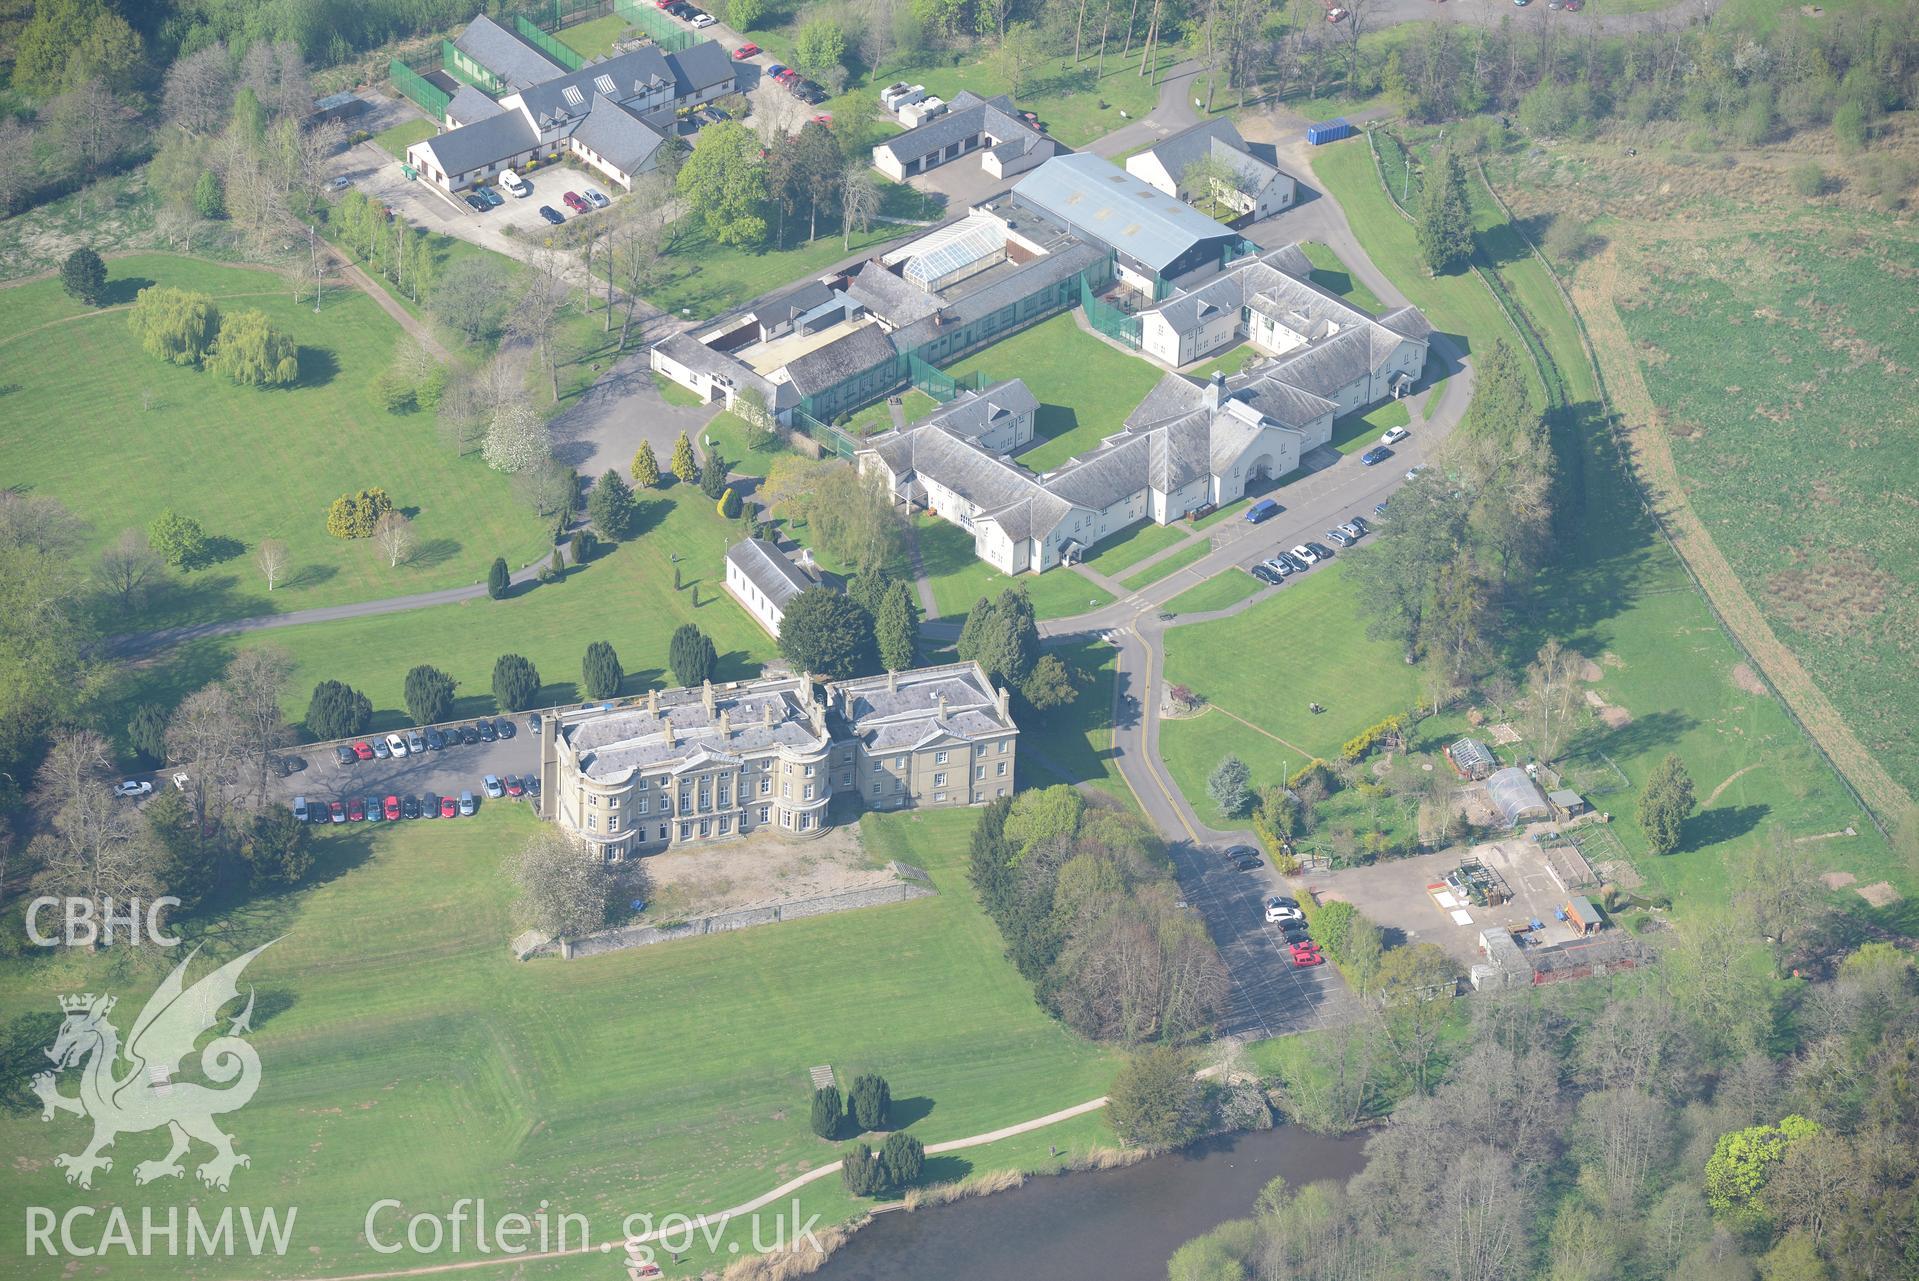 Llanarth Court Garden and Stableblock, and St Mary & St Michael Church. Oblique aerial photograph taken during the Royal Commission's programme of archaeological aerial reconnaissance by Toby Driver on 21st April 2015